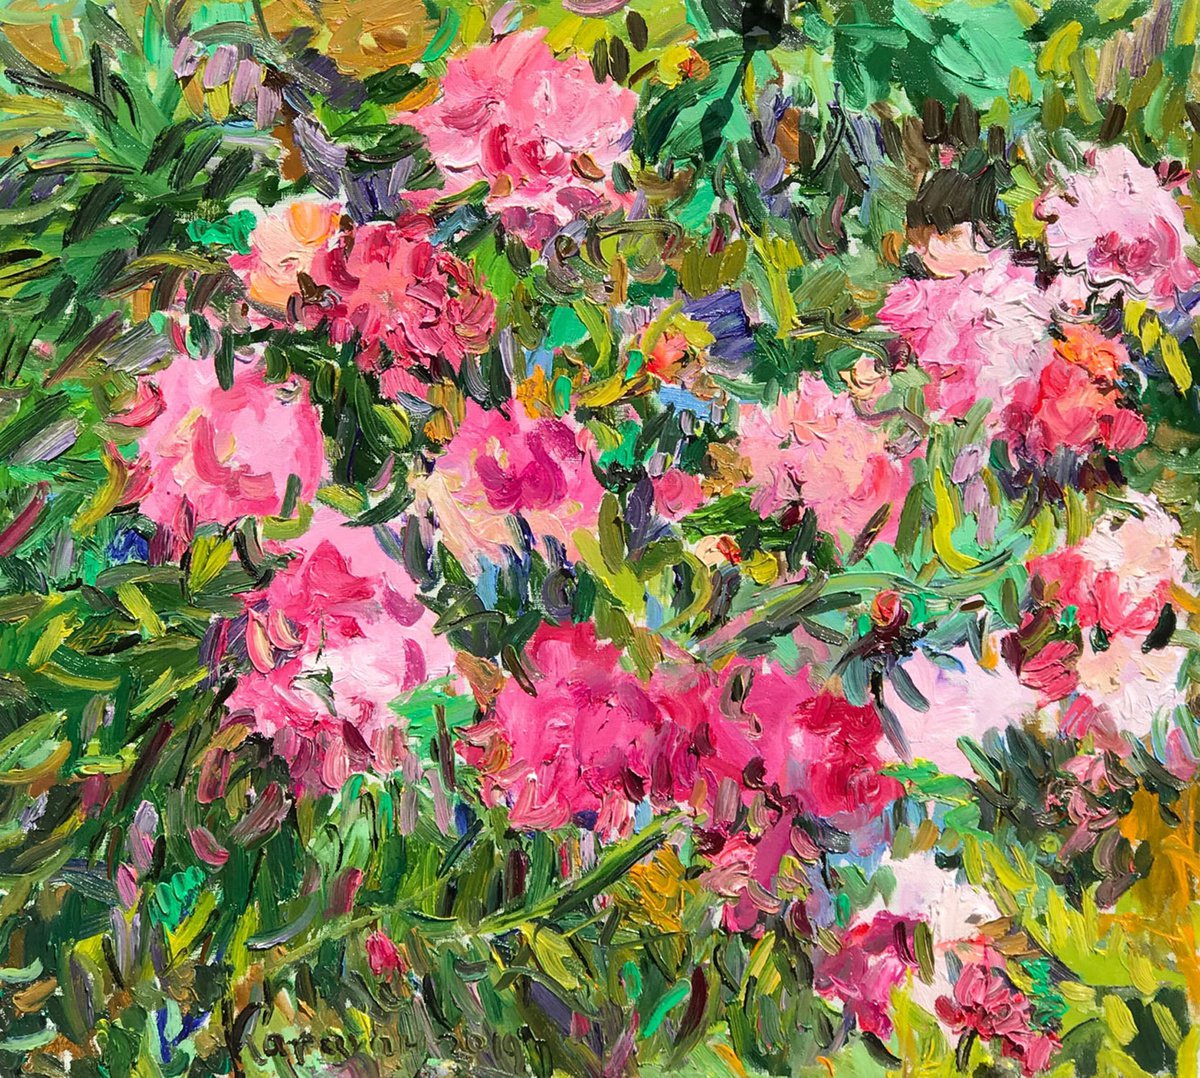 PEONIES - Floral art, landscape, original painting, oil on canvas, flowers in the garden by Karakhan